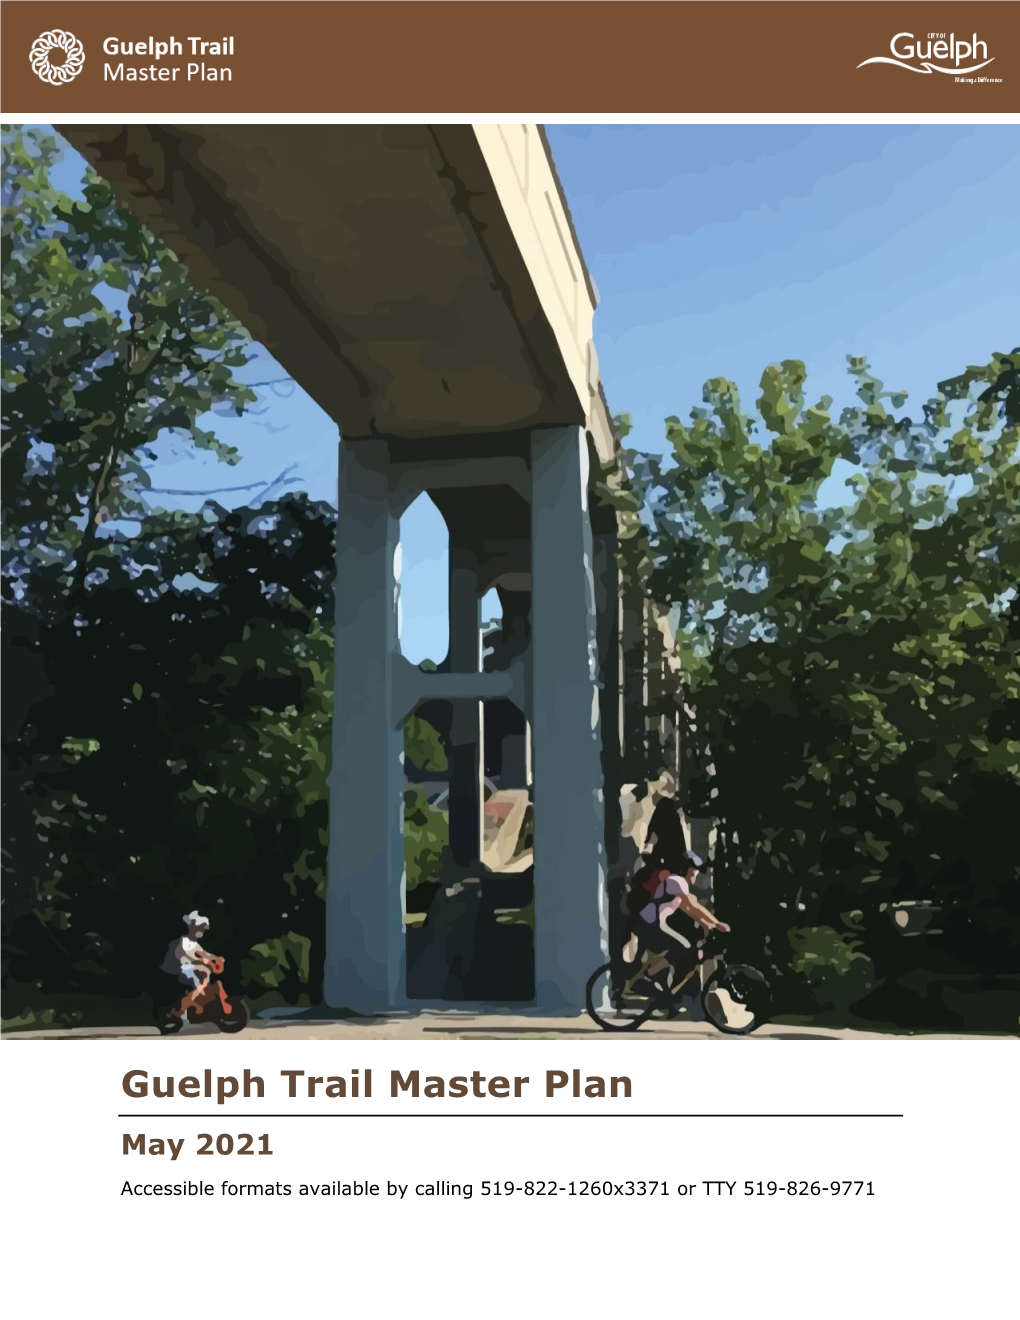 Guelph Trail Master Plan May 2021